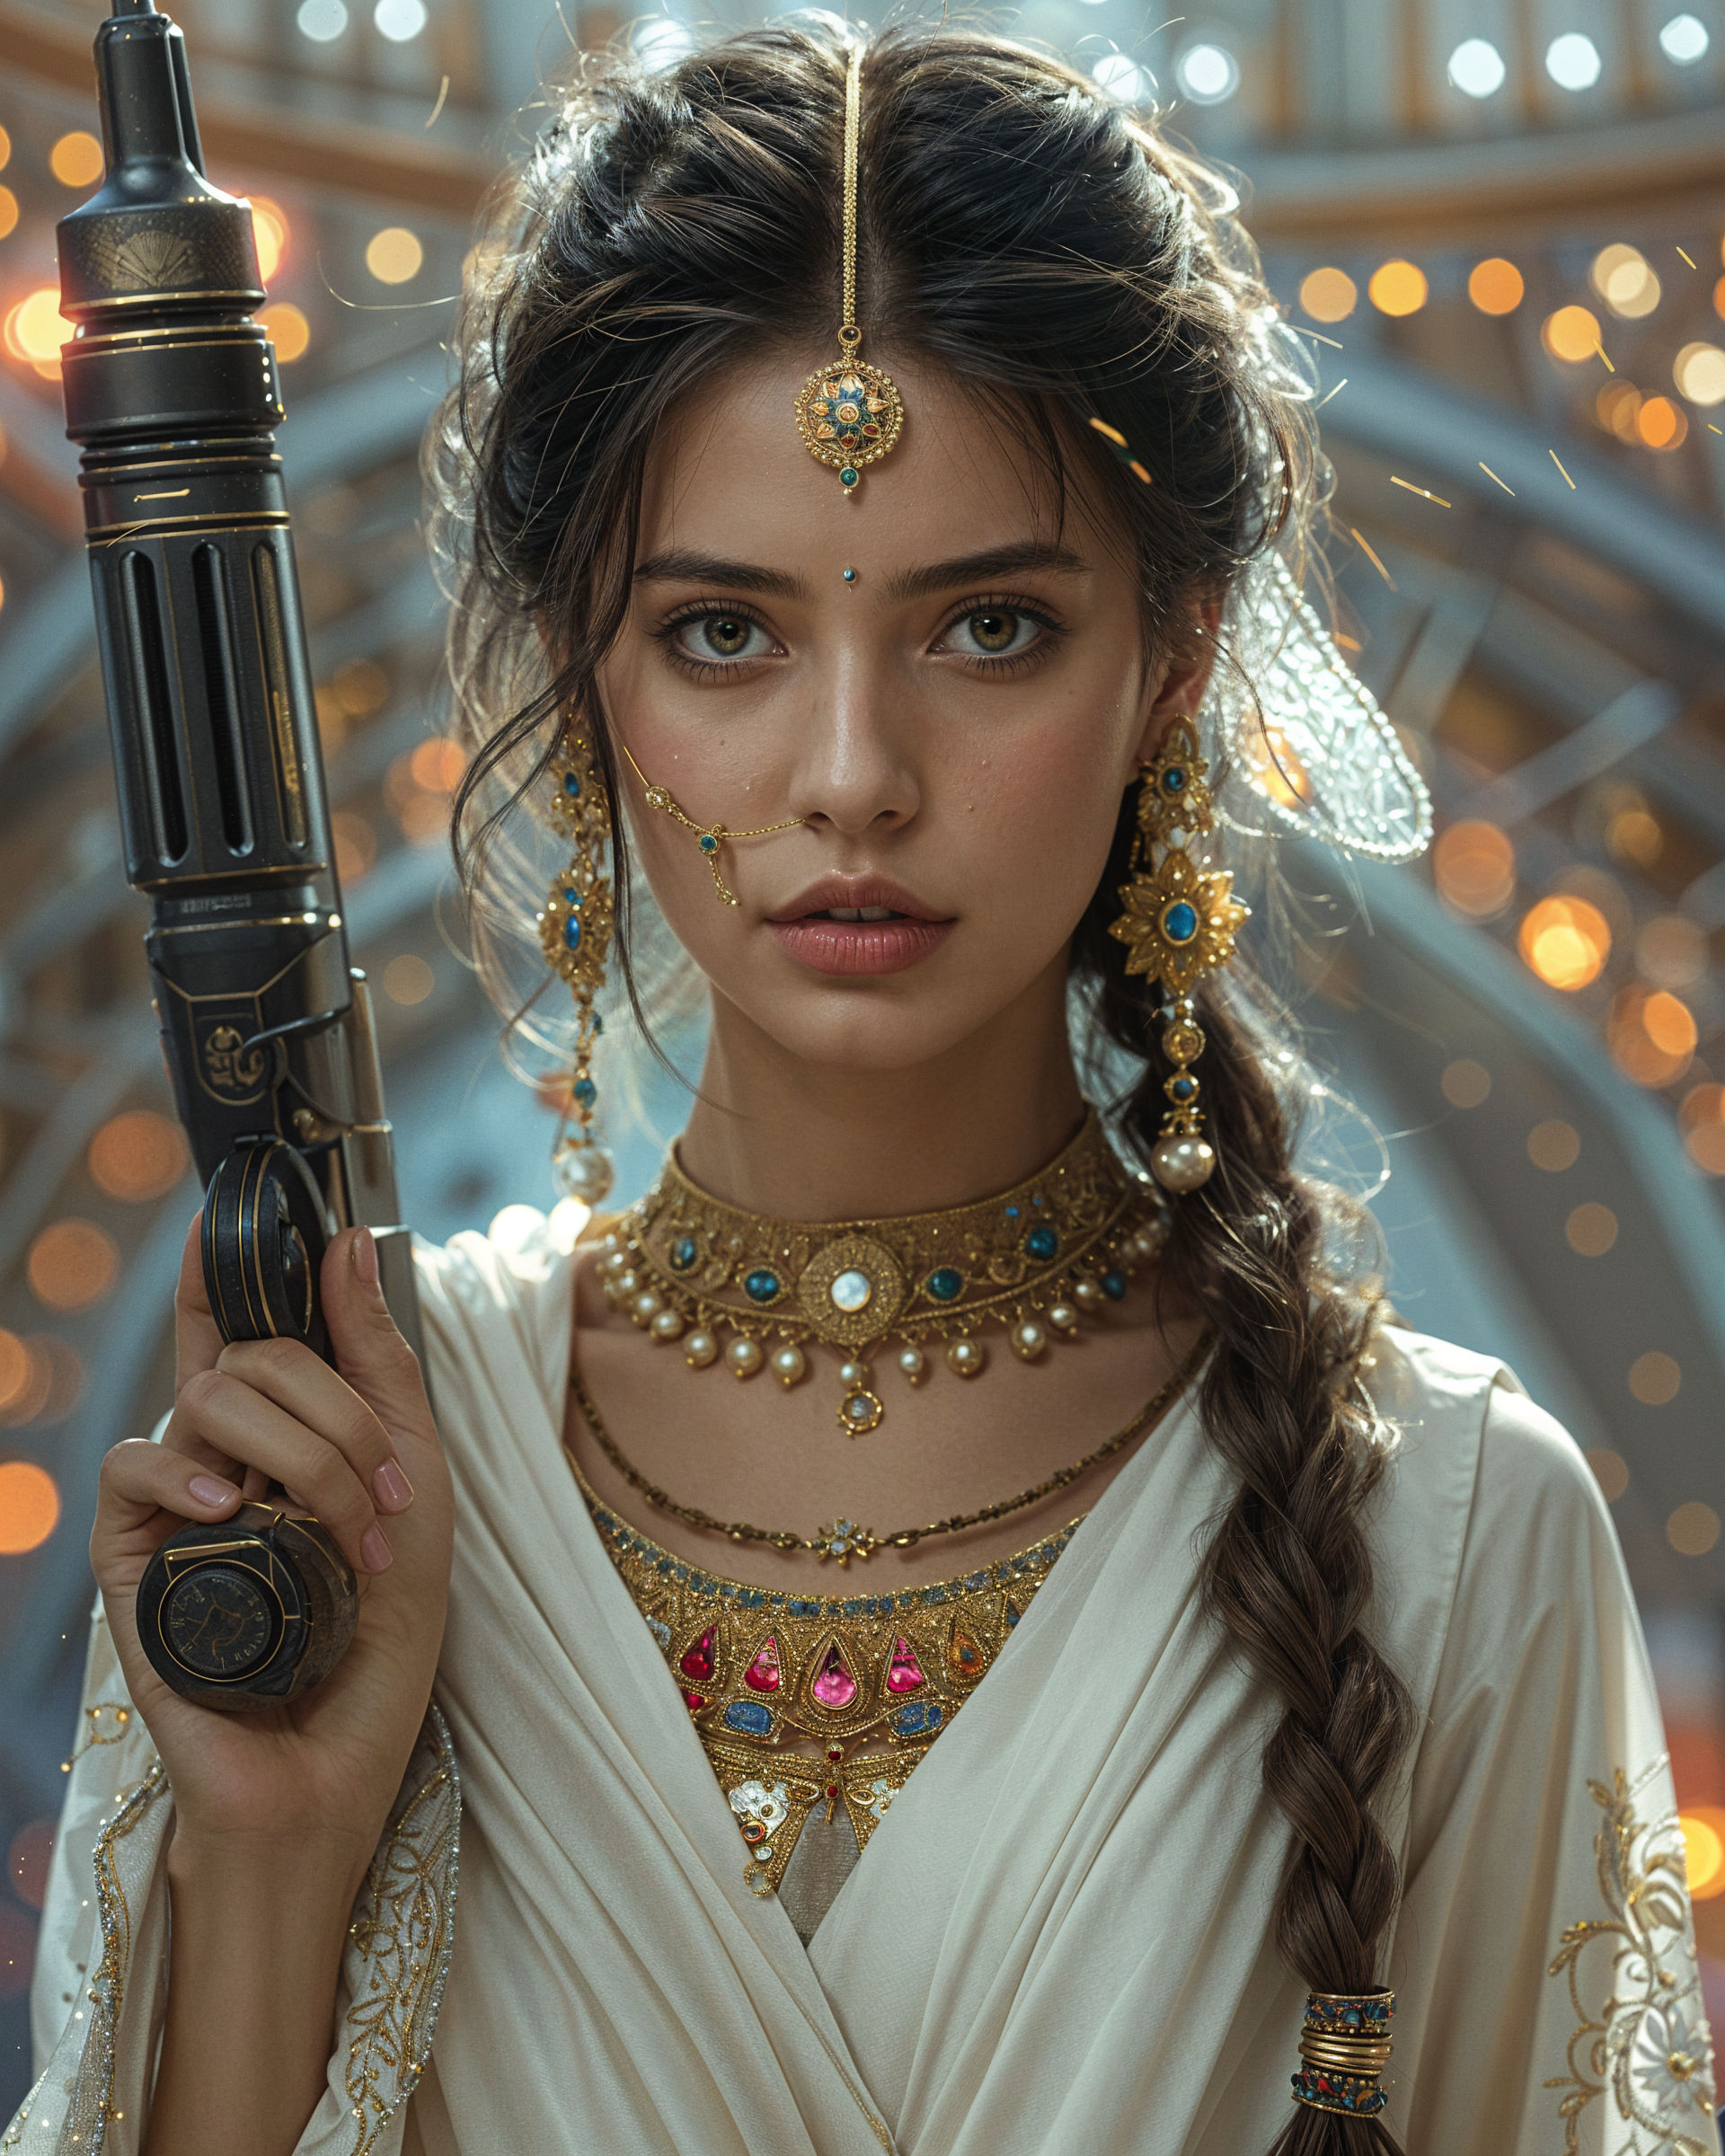 Woman in Indian attire with braided hair and jewelry holding a gun, against a luminous background.